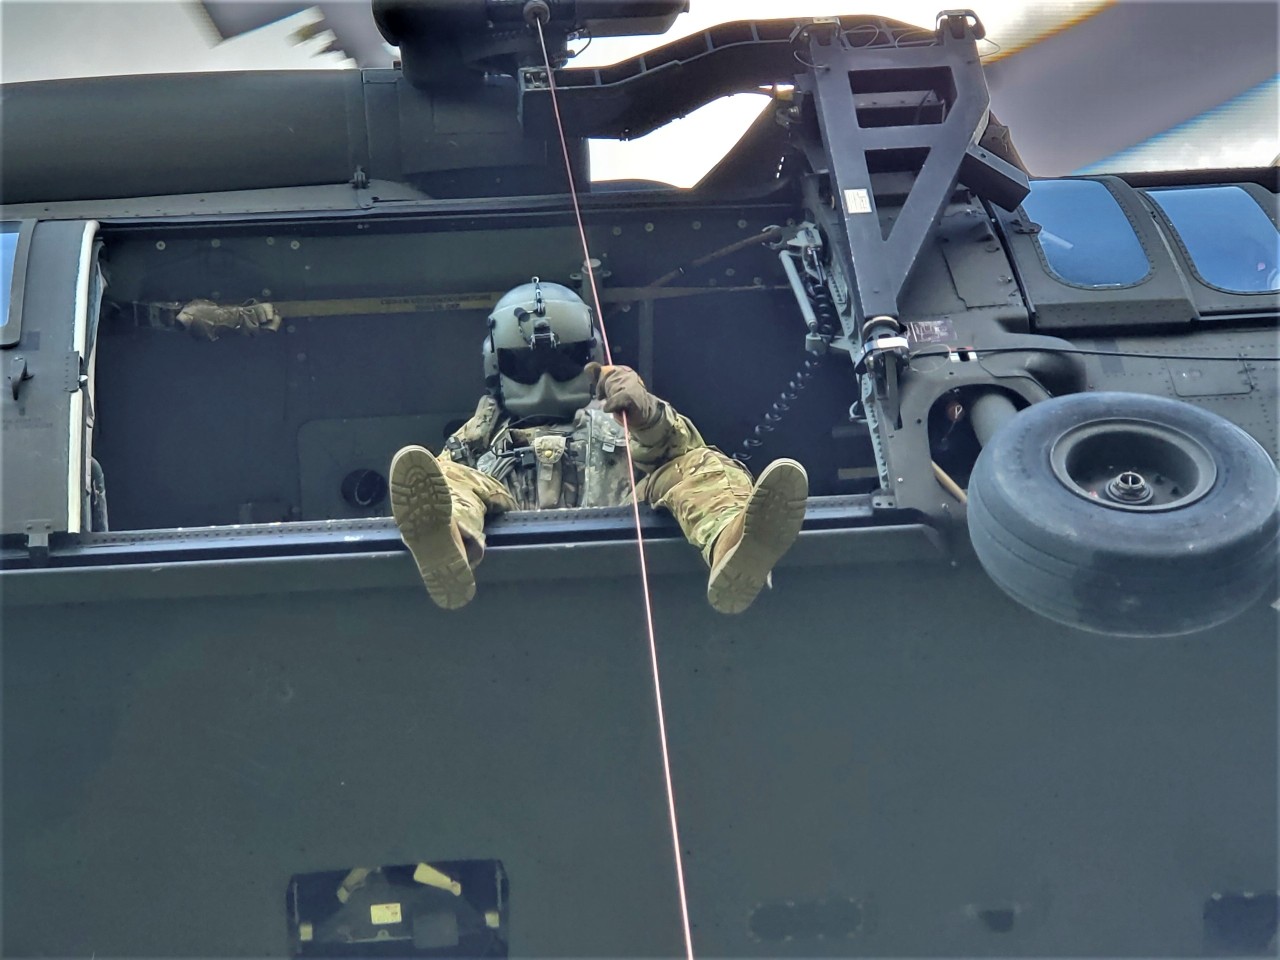 Sgt. Tim Allen lowers Sgt. 1st Class Tracy Banta, a Critical Care Flight Paramedic, to a bear attack victim in the Great Smoky Mountain National Park Area, June 18. (Courtesy photo from the Tennessee National Guard)